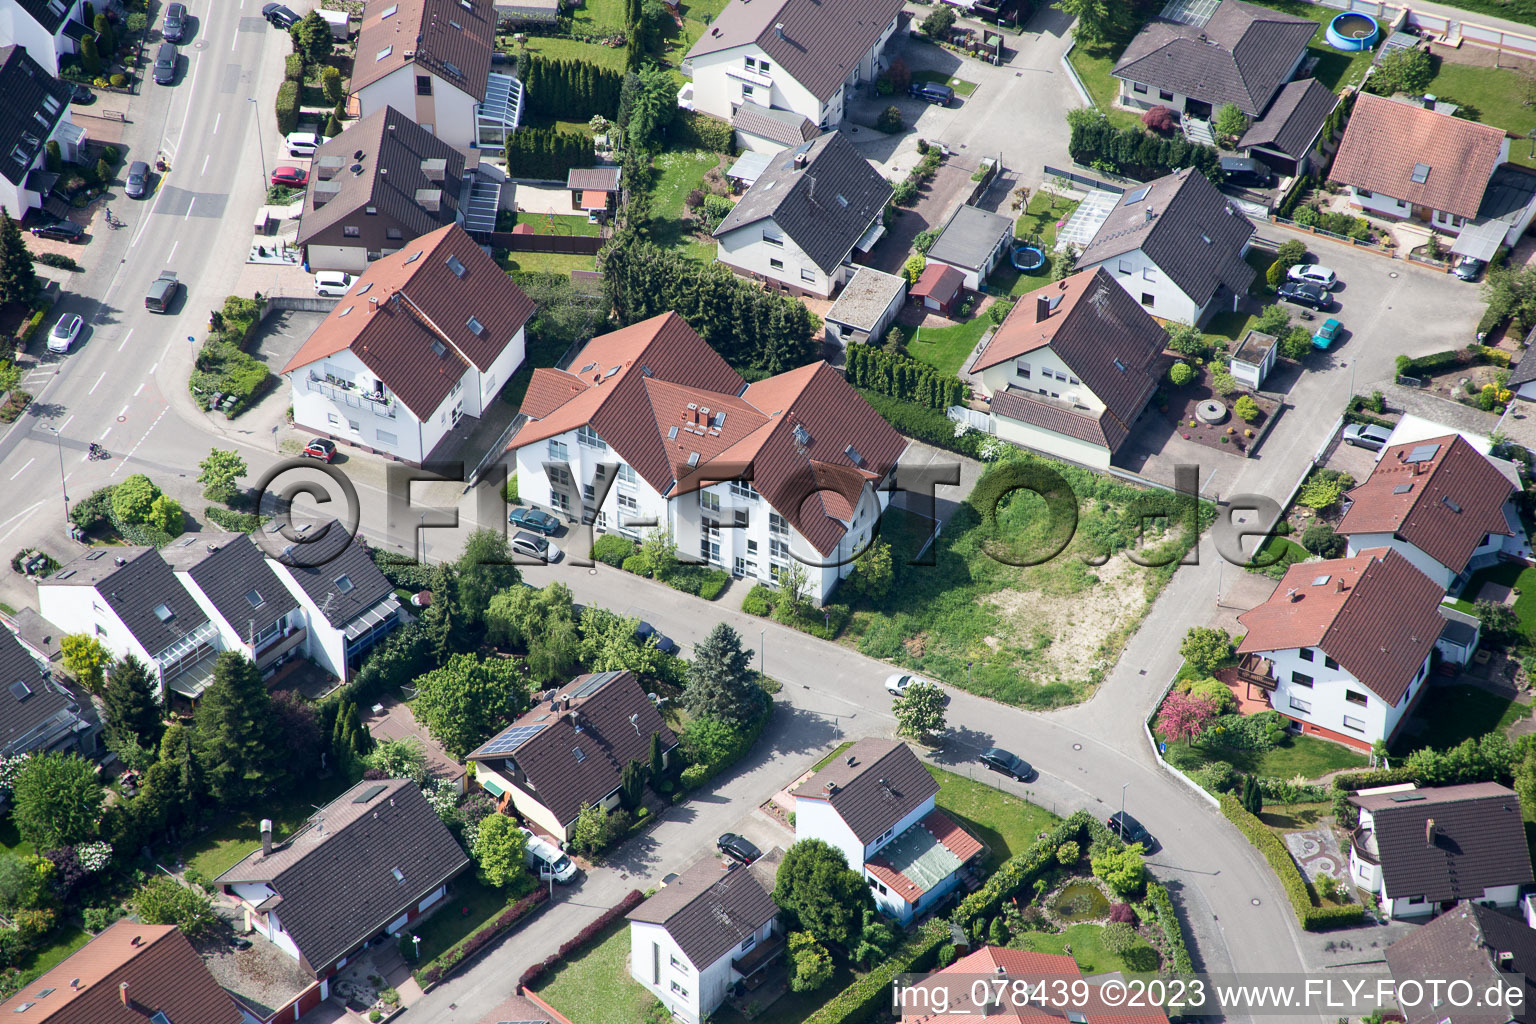 Hagenbach in the state Rhineland-Palatinate, Germany from above